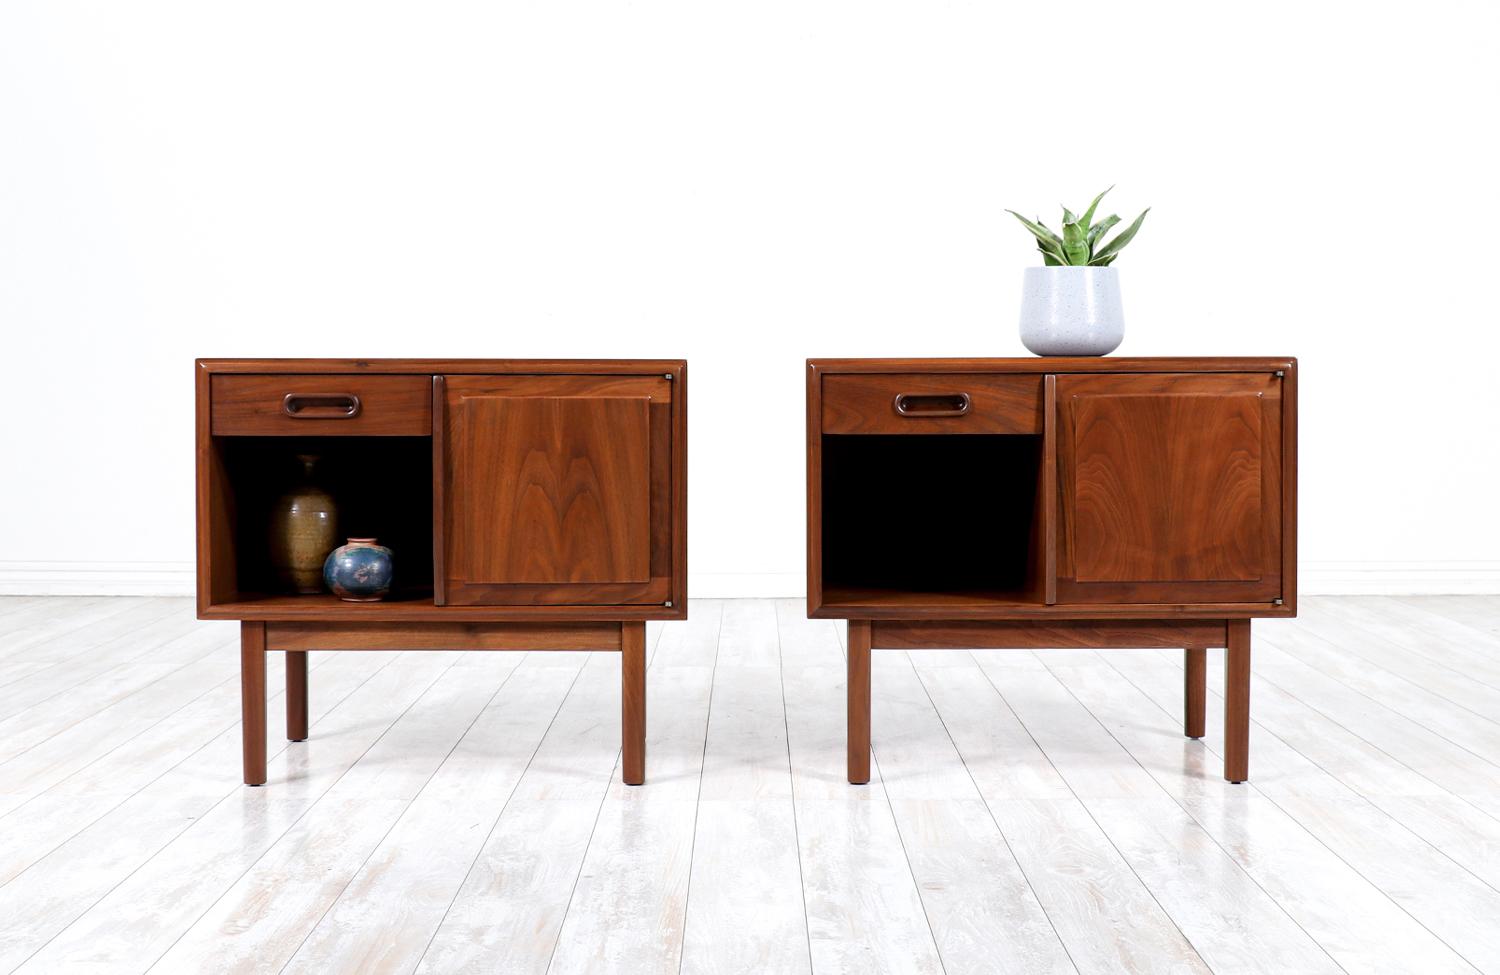 Jack Cartwright Walnut Night Stands for Founders Co.

________________________________________

Transforming a piece of Mid-Century Modern furniture is like bringing history back to life, and we take this journey with passion and precision. With